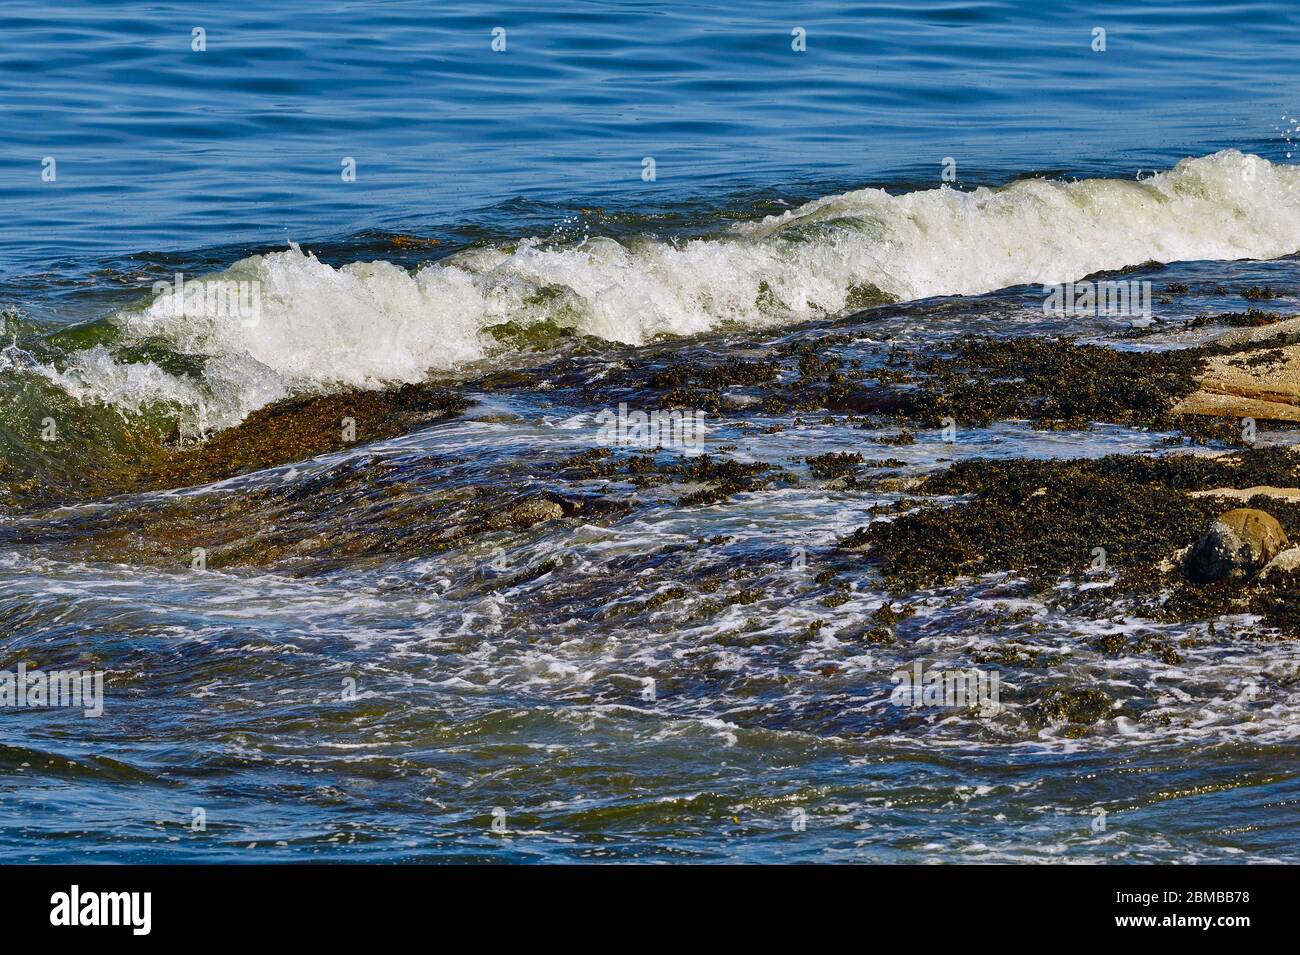 An ocean breaking over a rocky shore on Vancouver Island British Columbia Canada Stock Photo